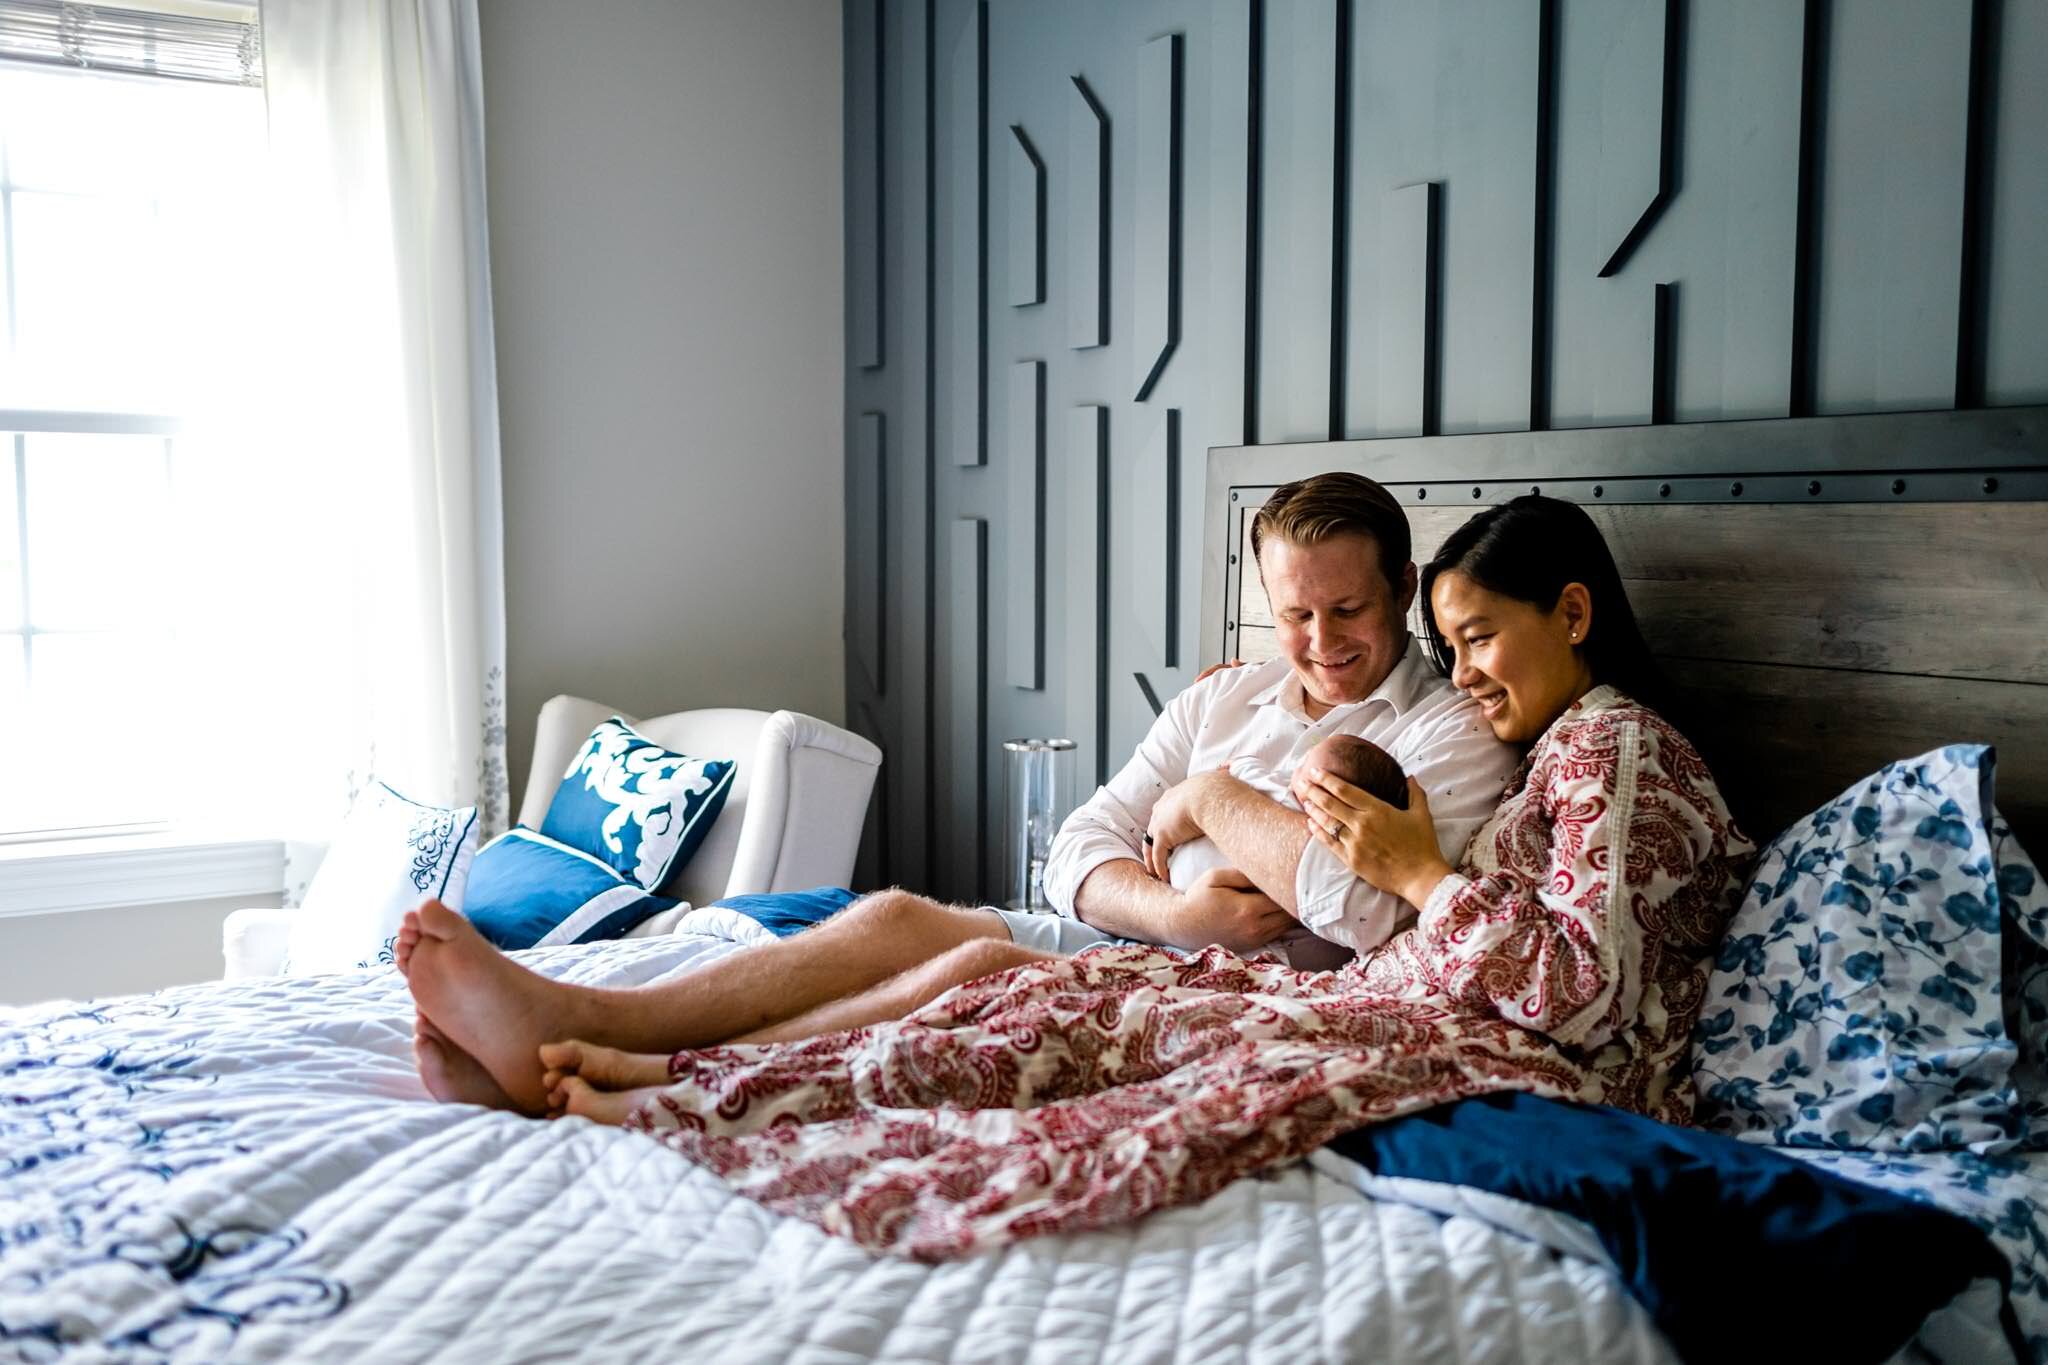 Pittsboro Newborn Photographer | By G. Lin Photography | Couple sitting on bed with newborn baby